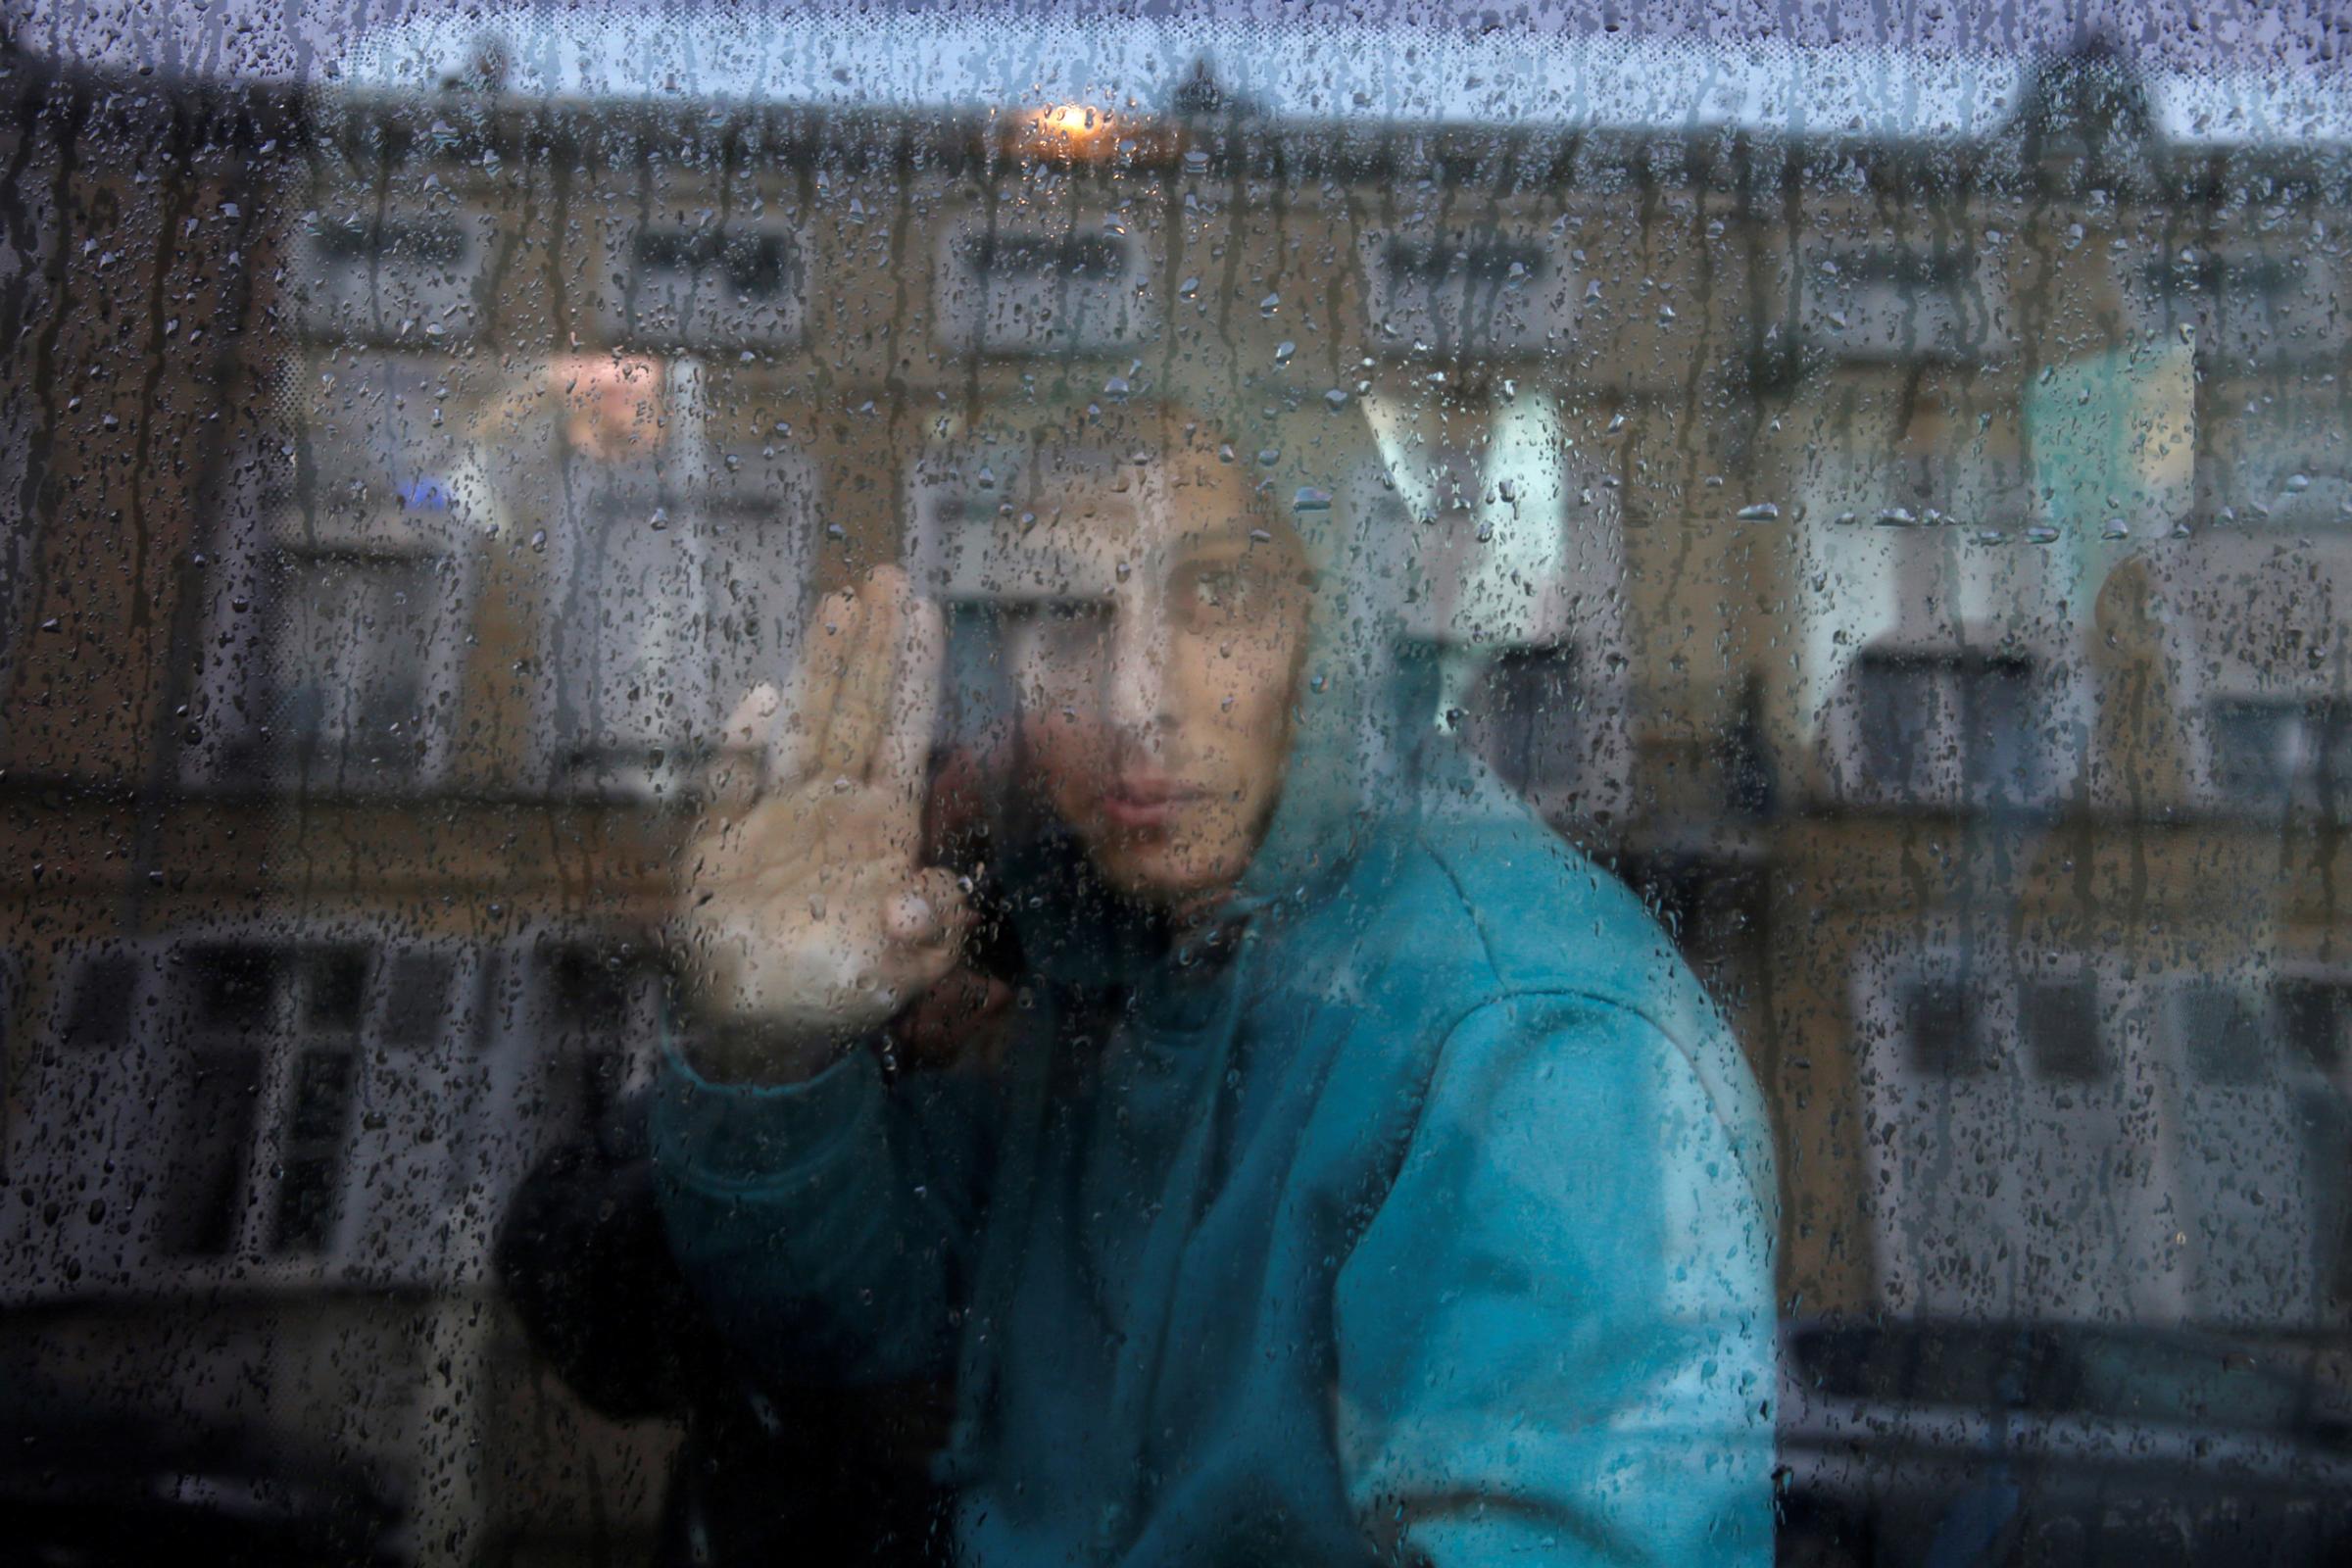 An Afghan adolescent migrant waves from a van as he departs with six others from the emergency shelter for minors in Saint Omer, France as they leave for Britain October 18, 2016. REUTERS/Pascal Rossignol TPX IMAGES OF THE DAY - RTX2PBMX